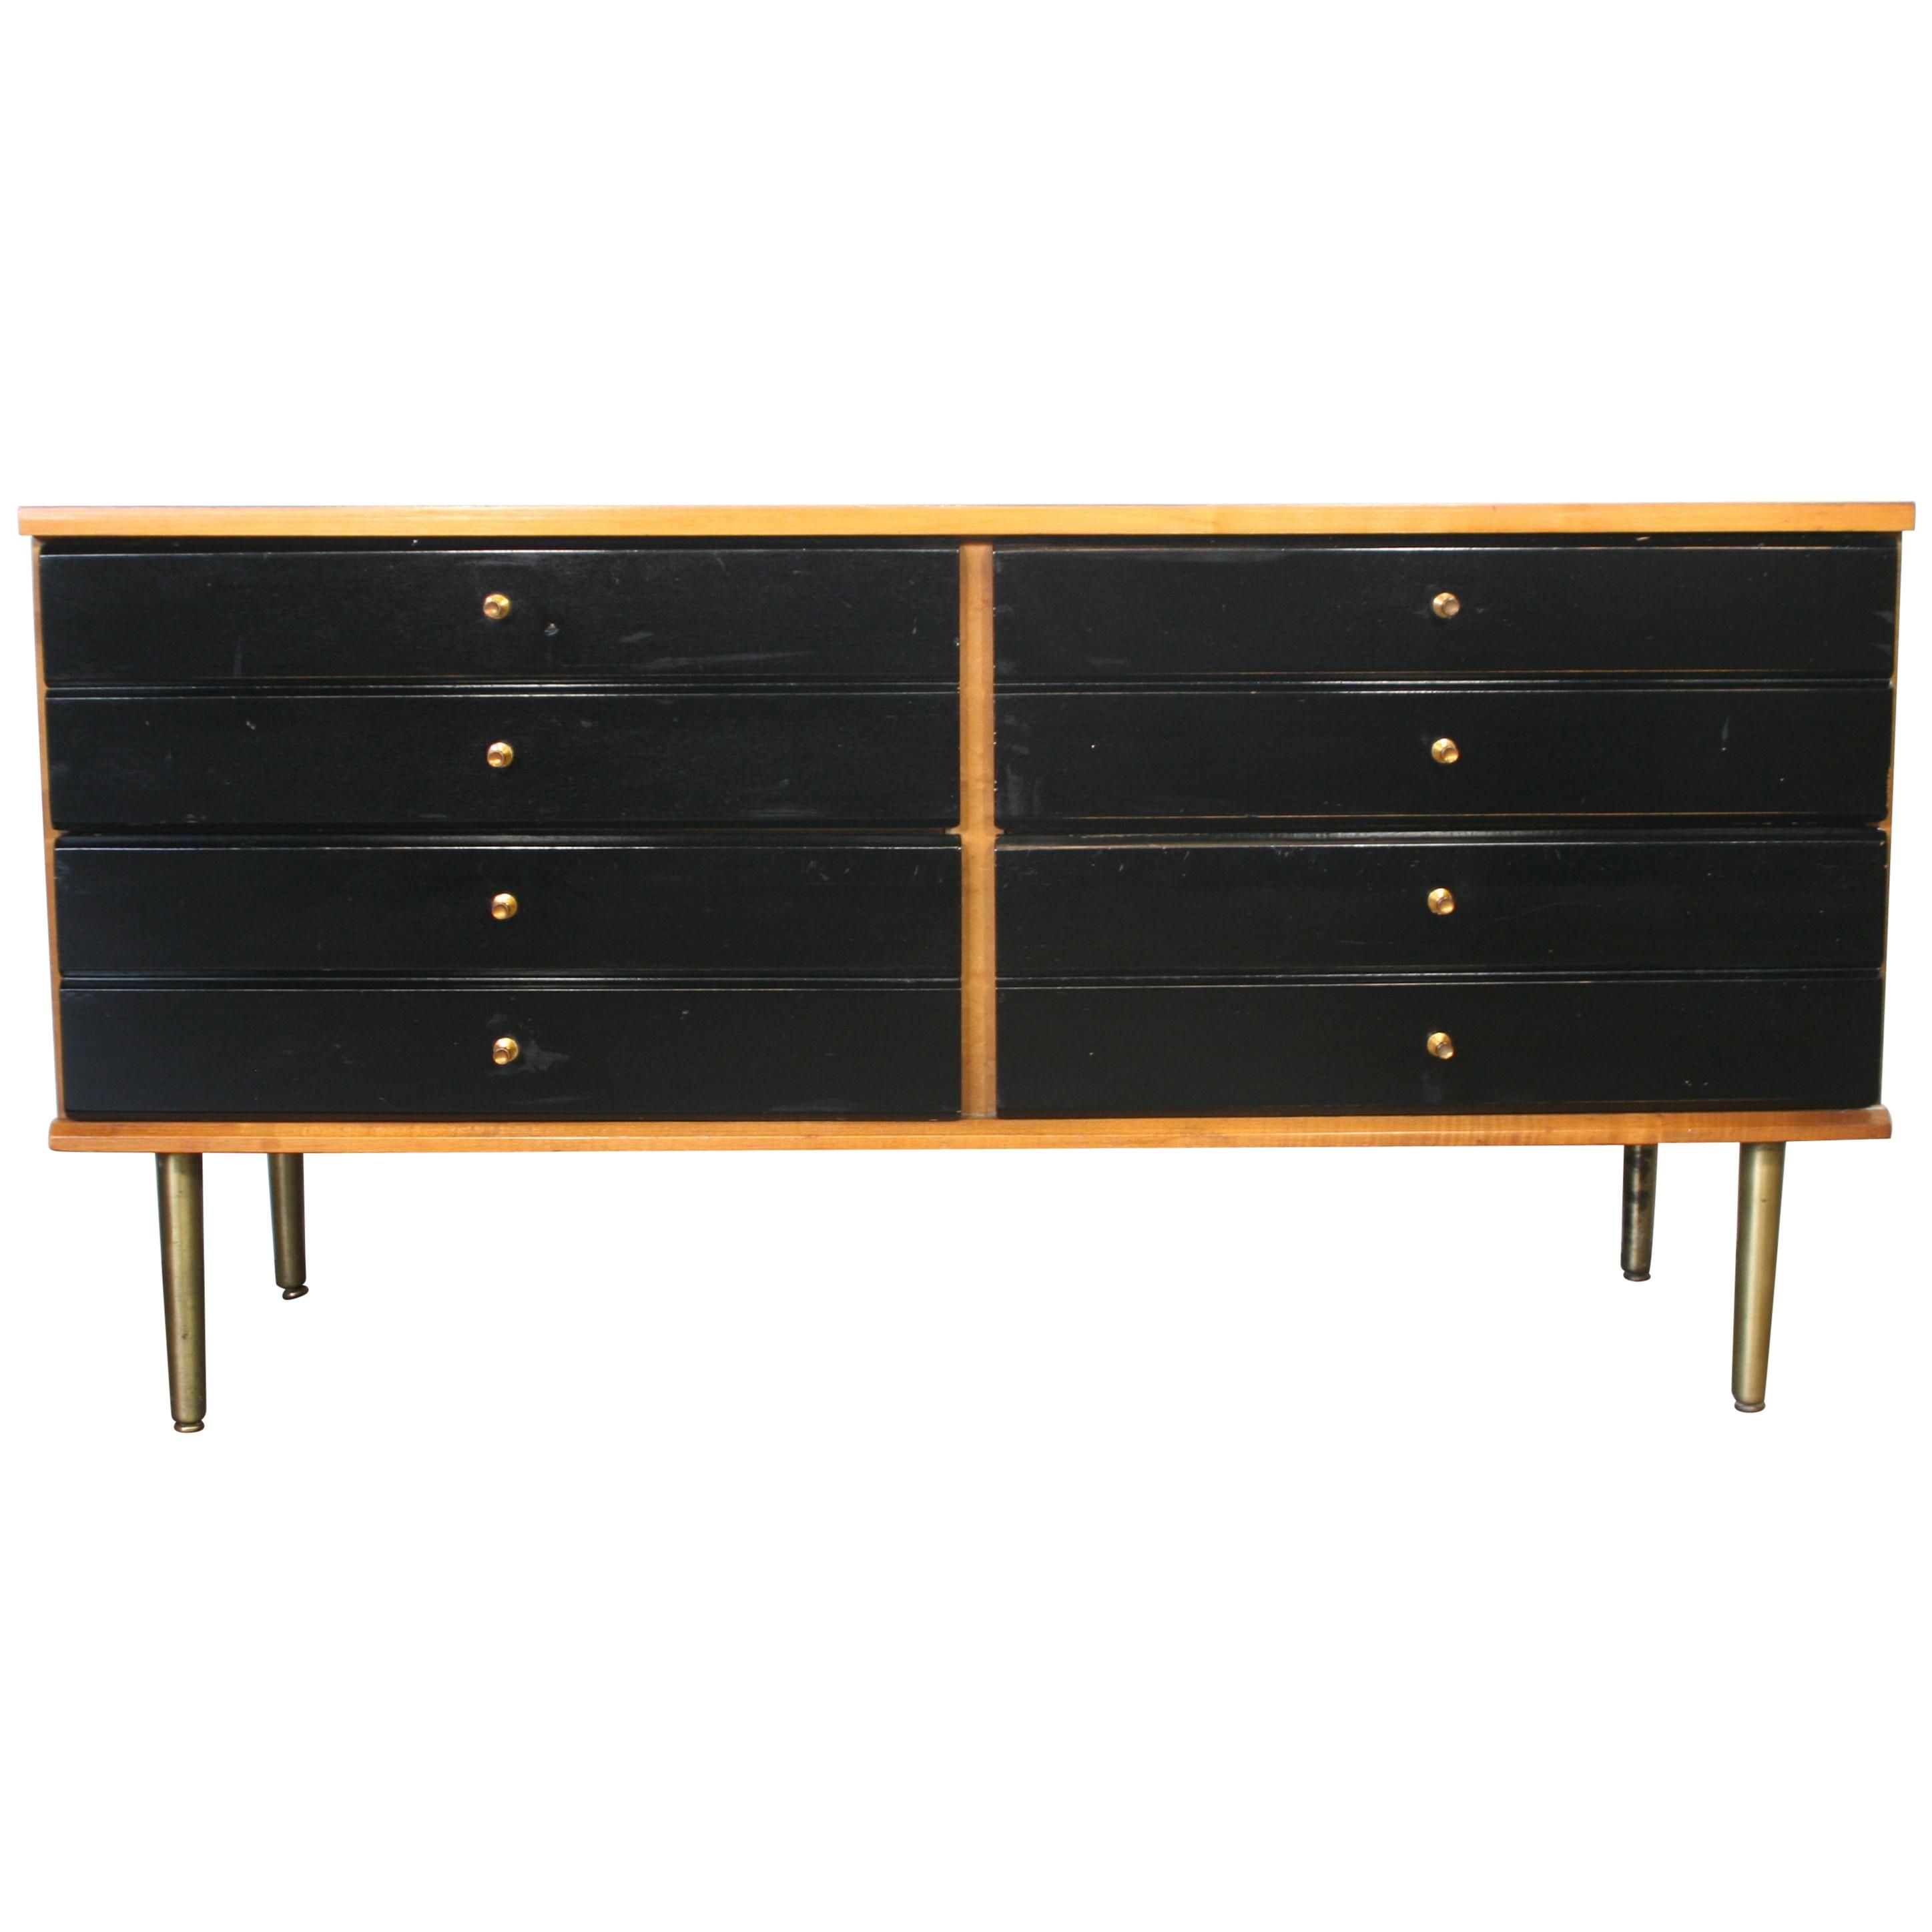 Midcentury Art Deco Style Two Door Black Credenza With Lucite And Brass Legs Regarding Blush Deco Credenzas (View 11 of 30)